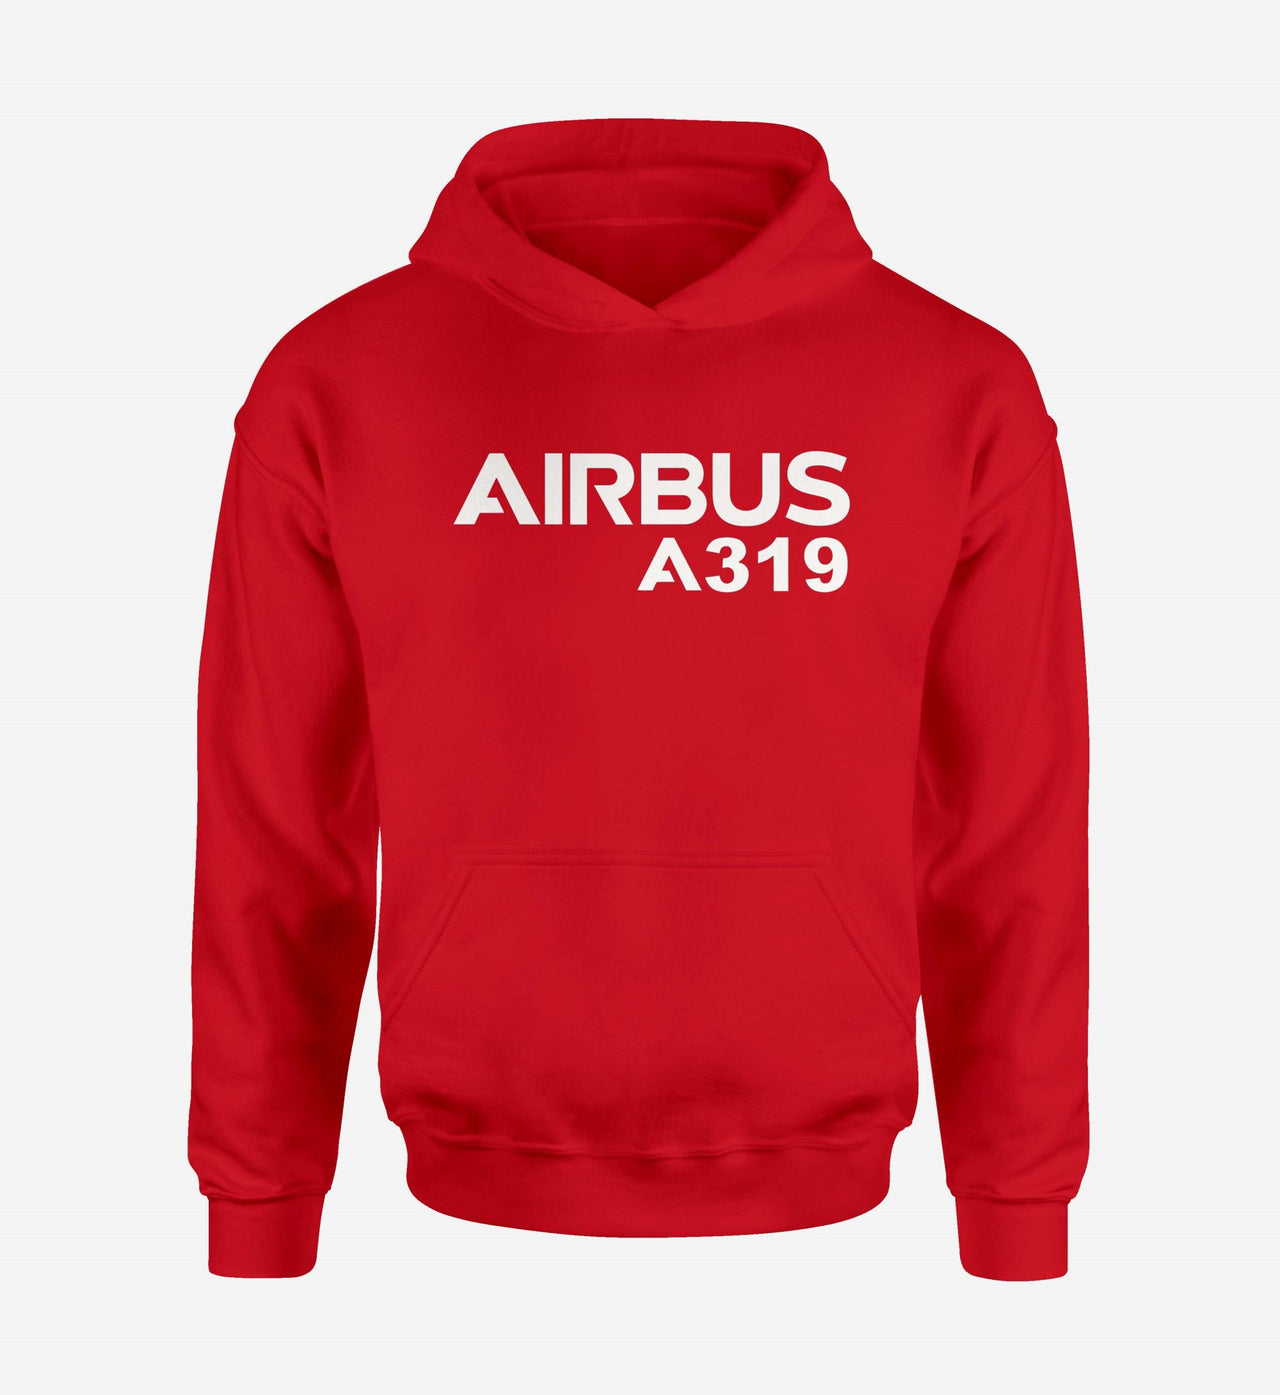 Airbus A319 & Text Designed Hoodies